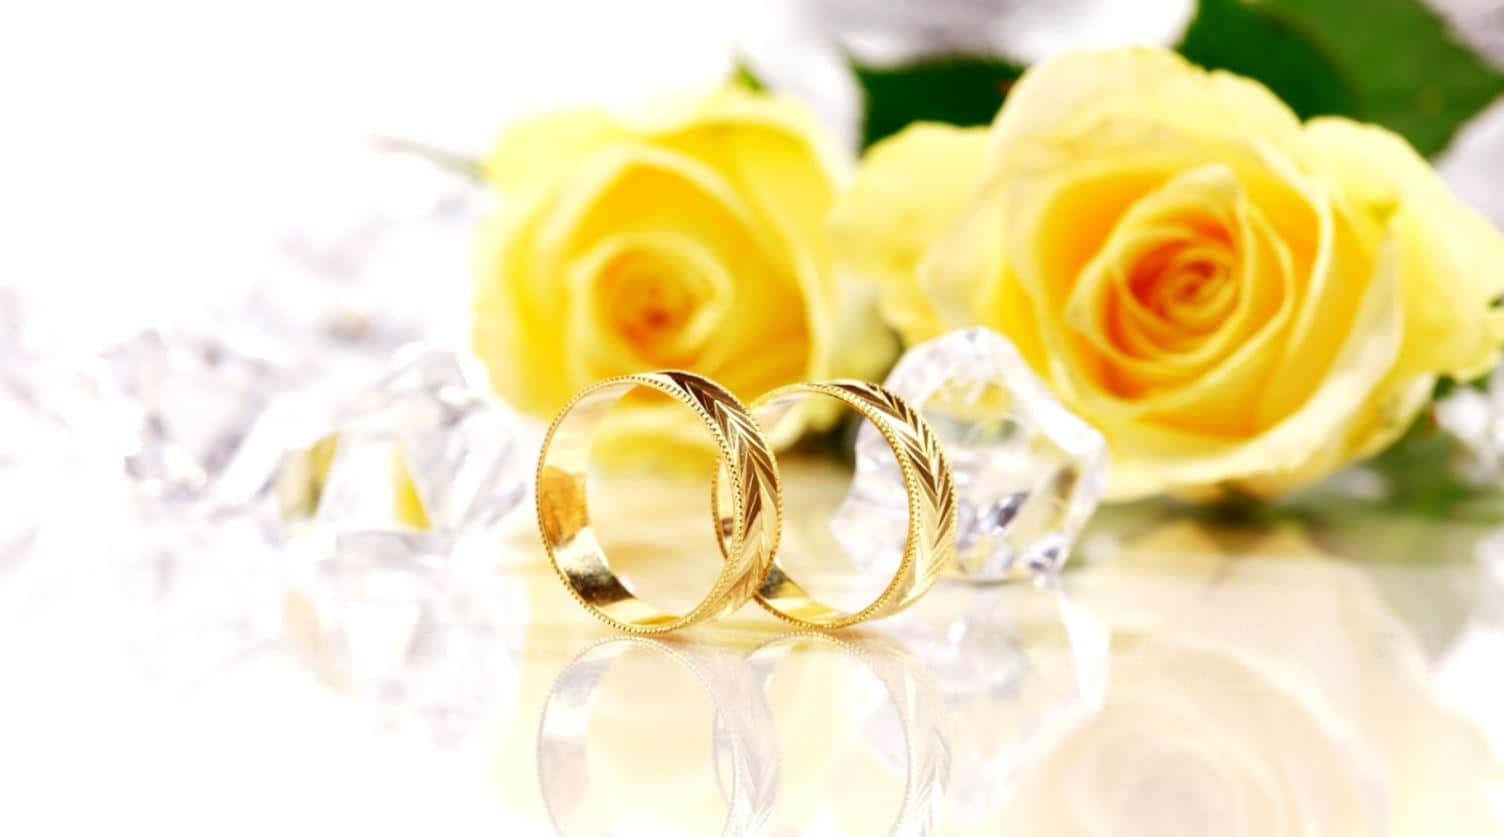 Two Wedding Rings On A White Background With Yellow Roses